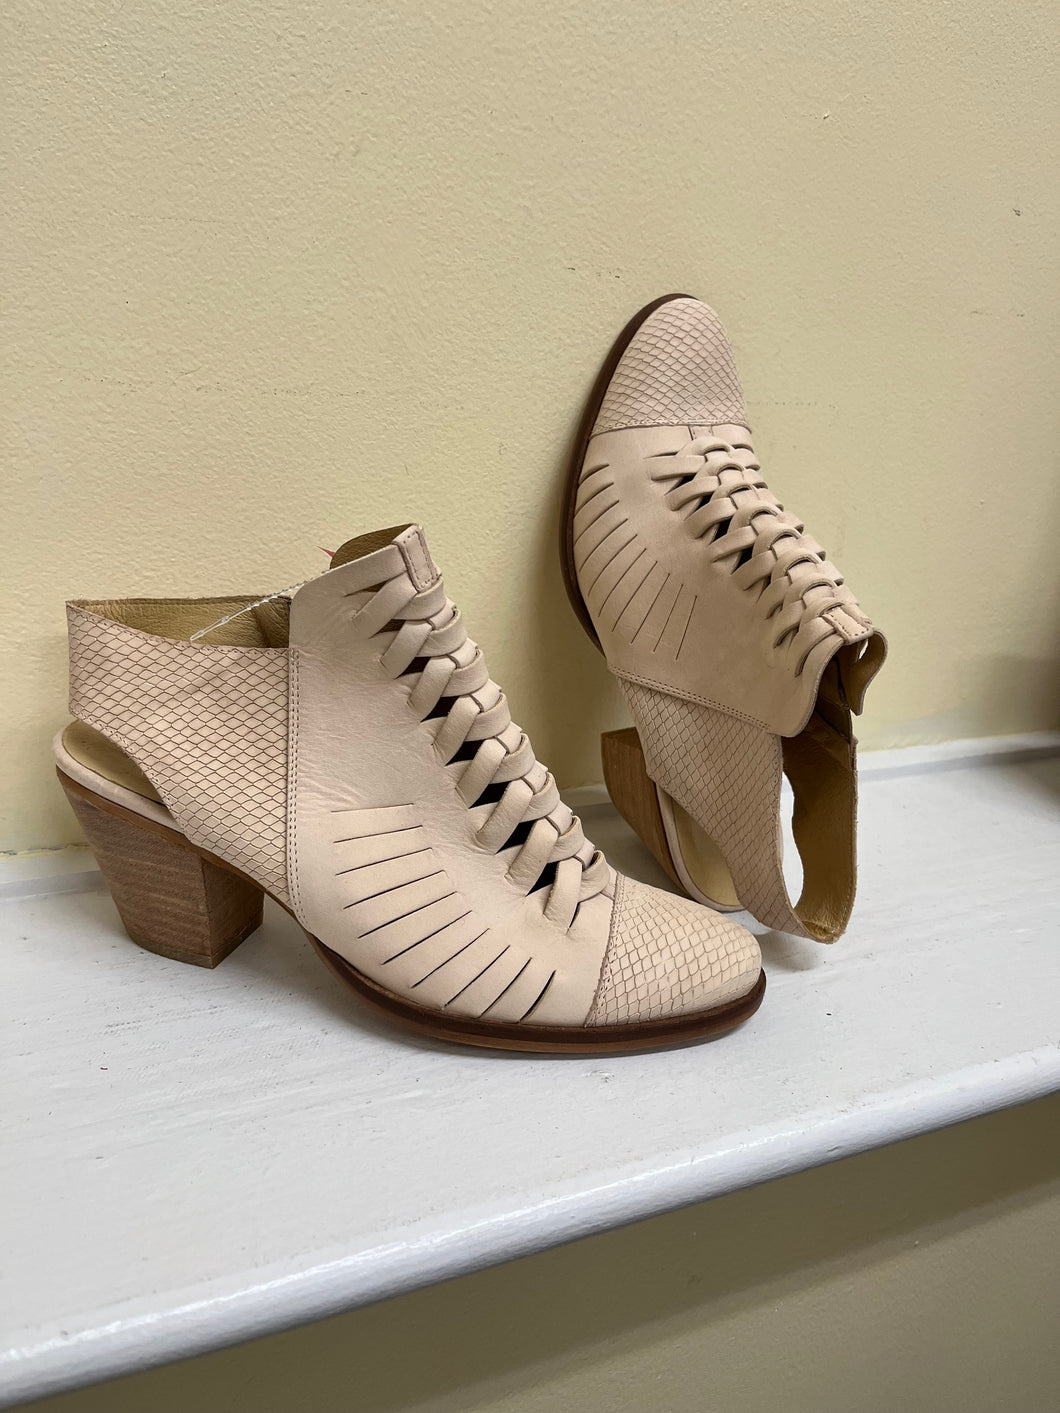 Free People Size 39 (8-8.5) Cream Shoes